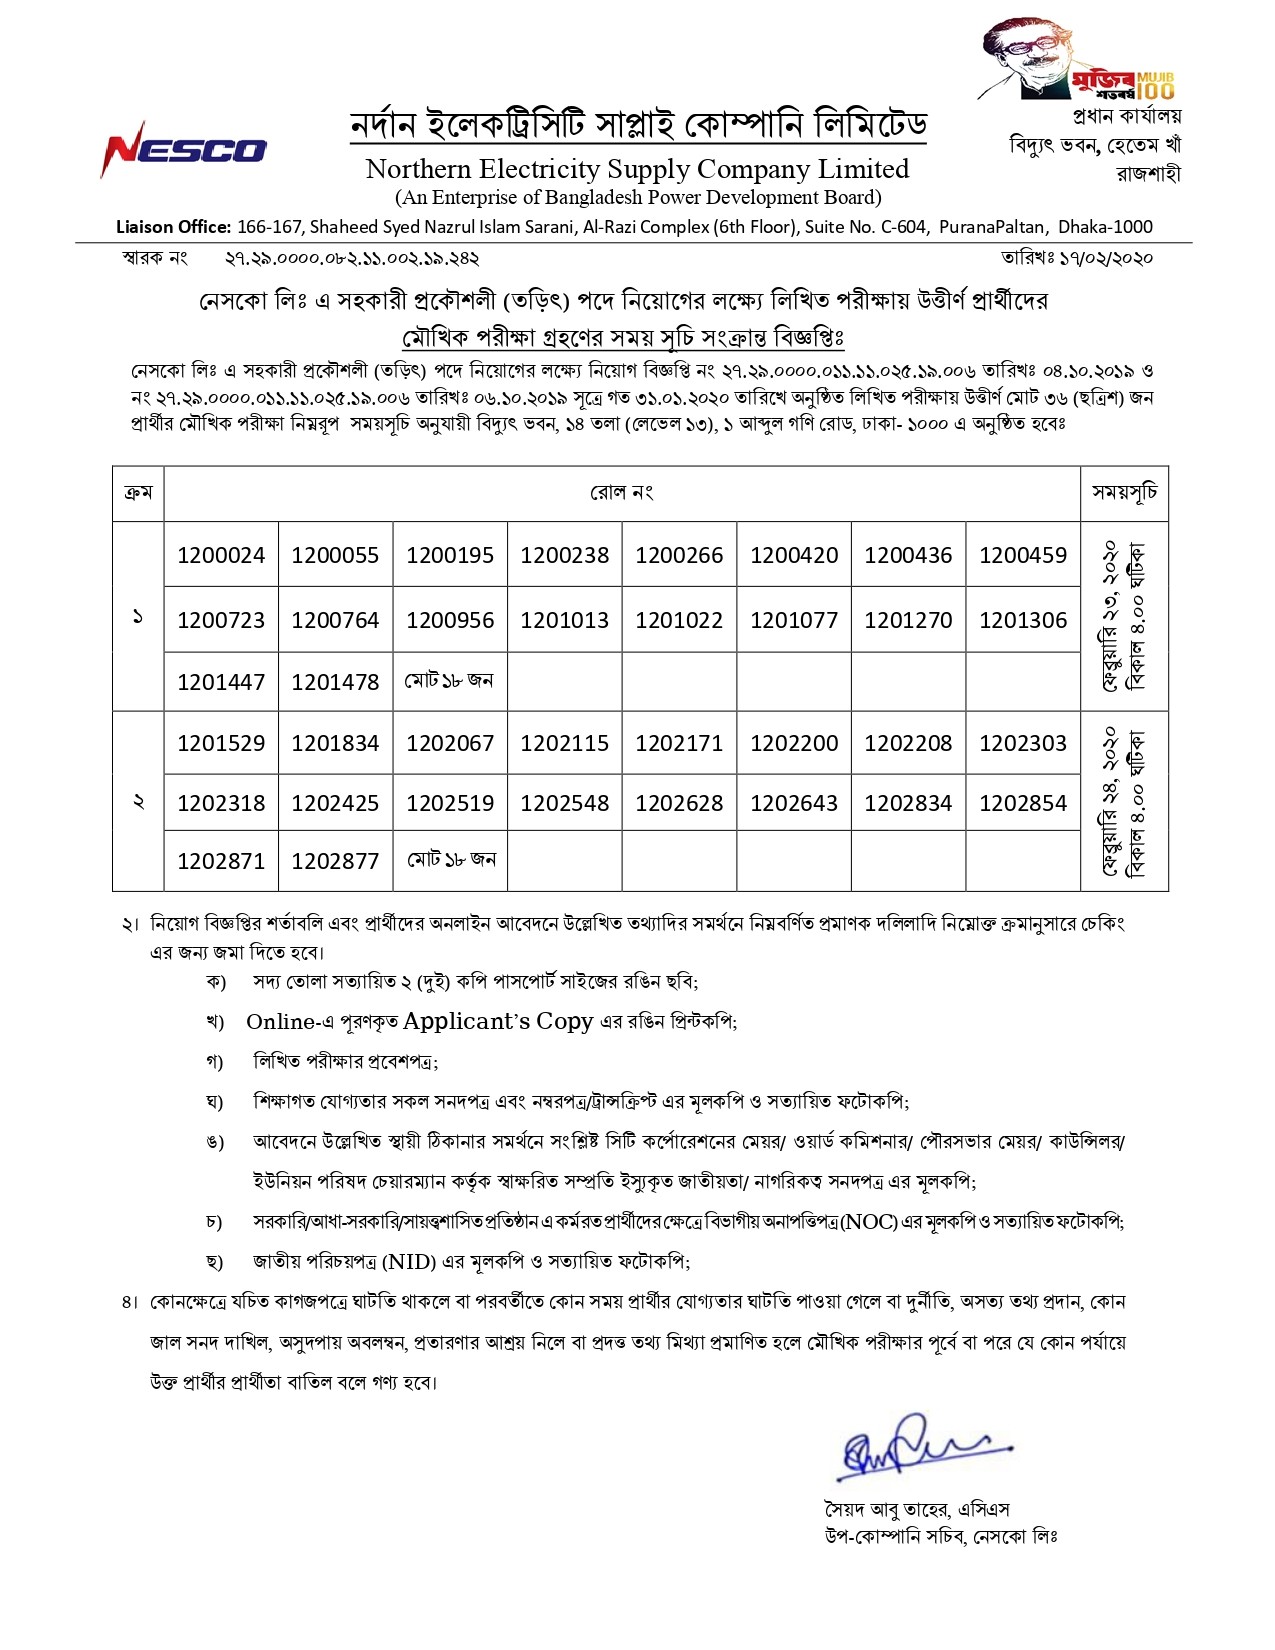 NESCO Assistant Engineer (Electrical) Result 2020